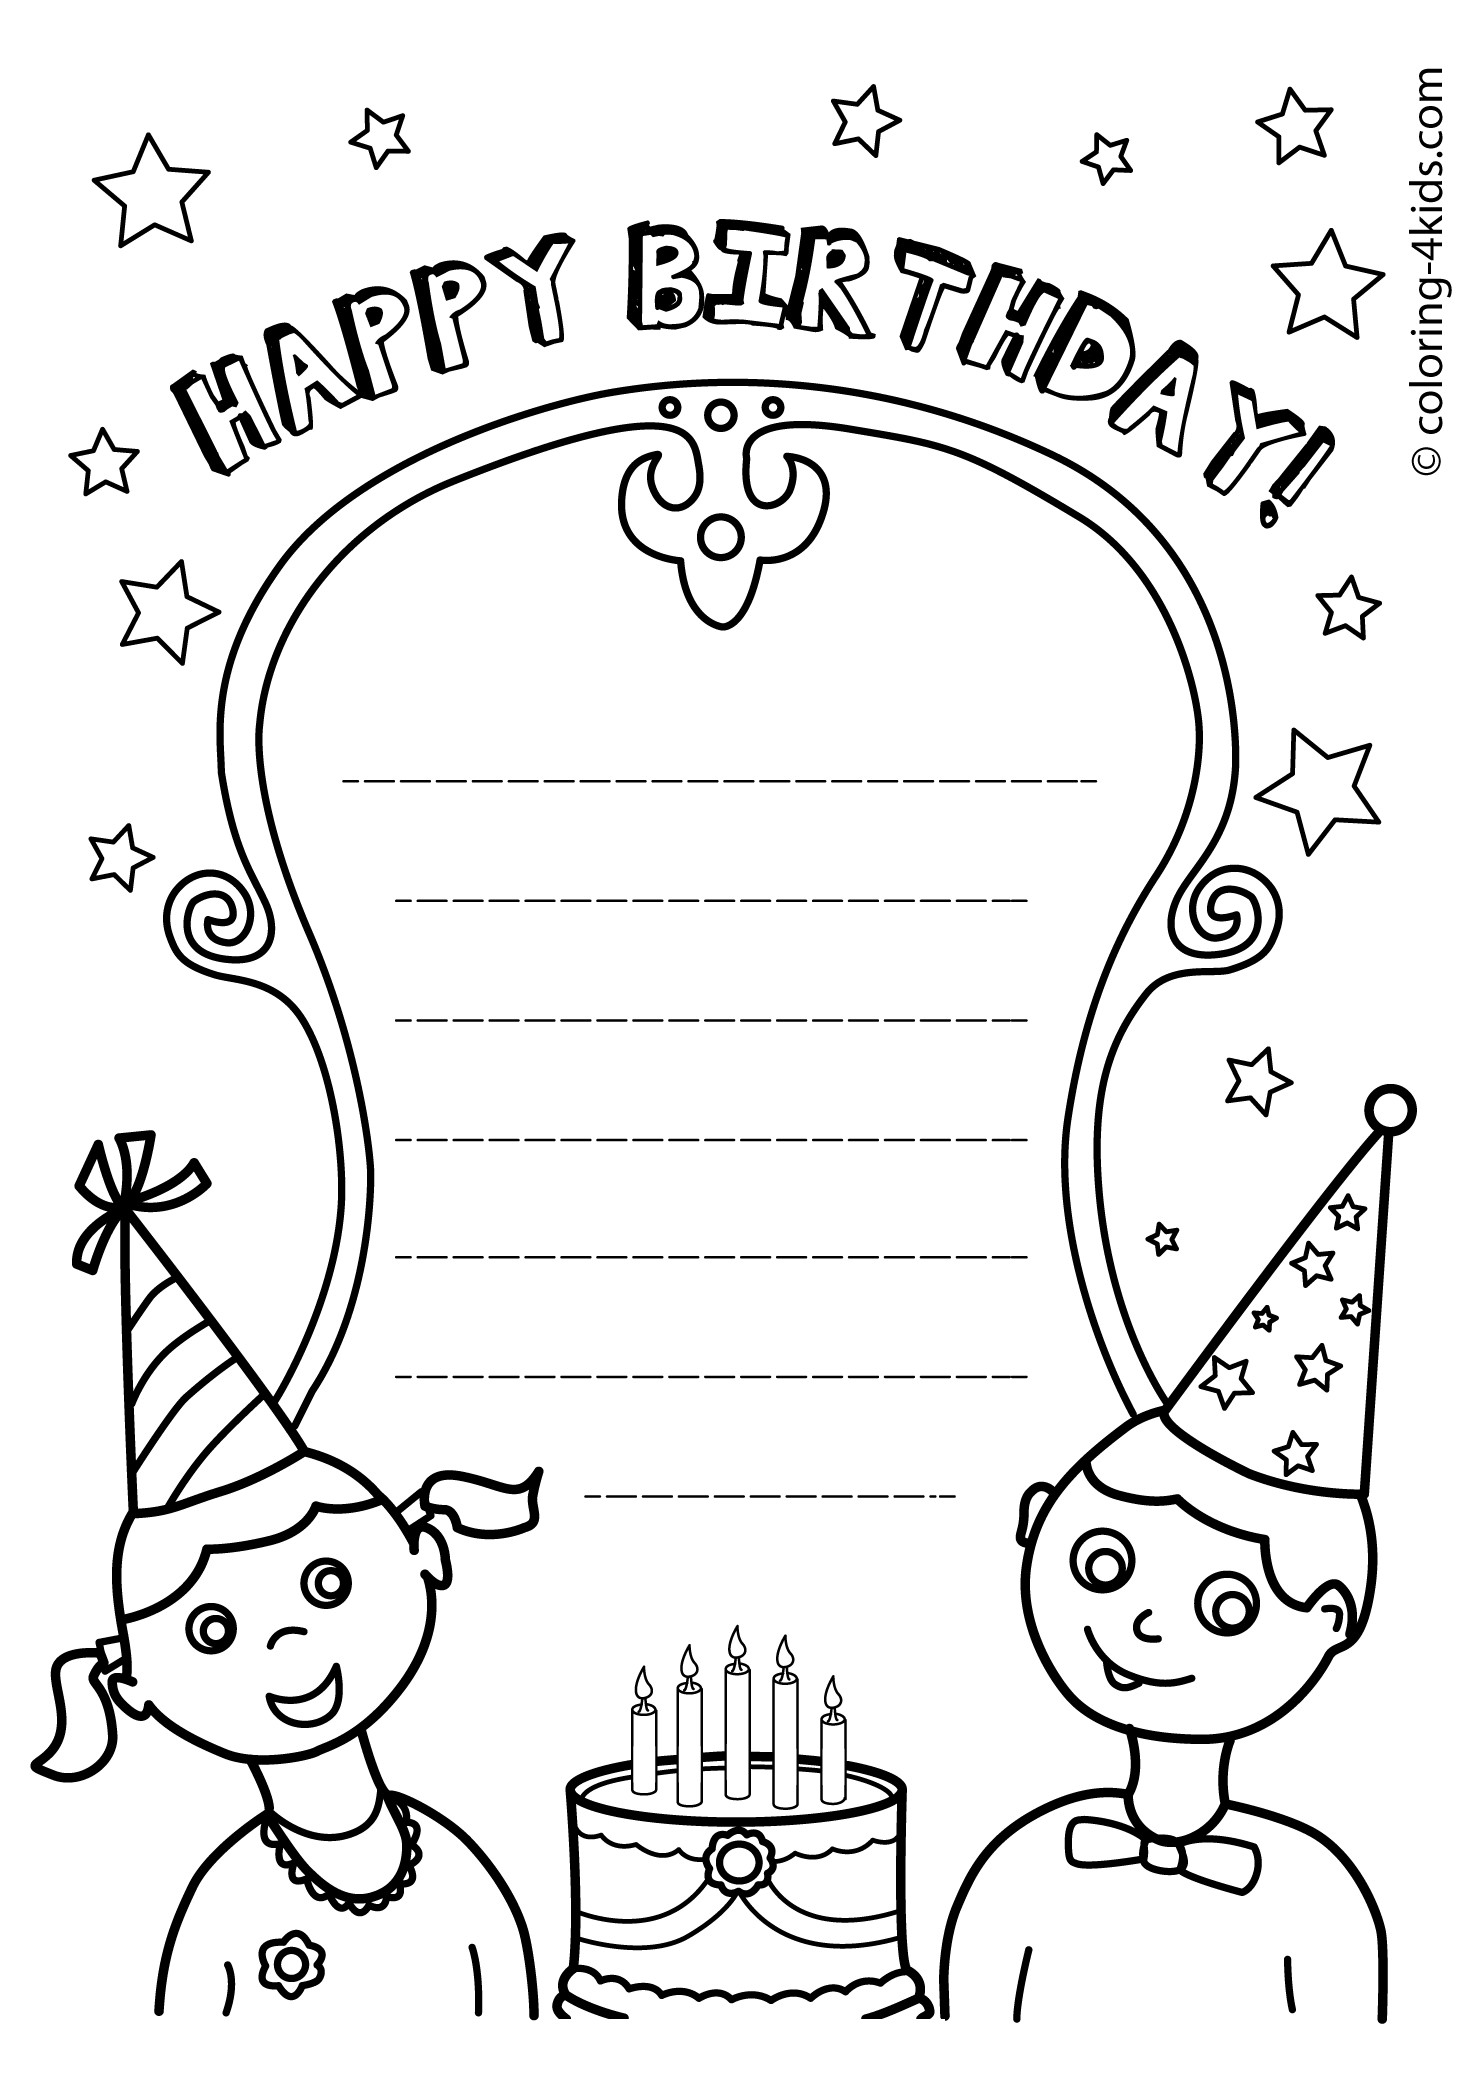 Free Printable Happy Birthday Coloring Pages
 Happy birthday printables – coloring pages